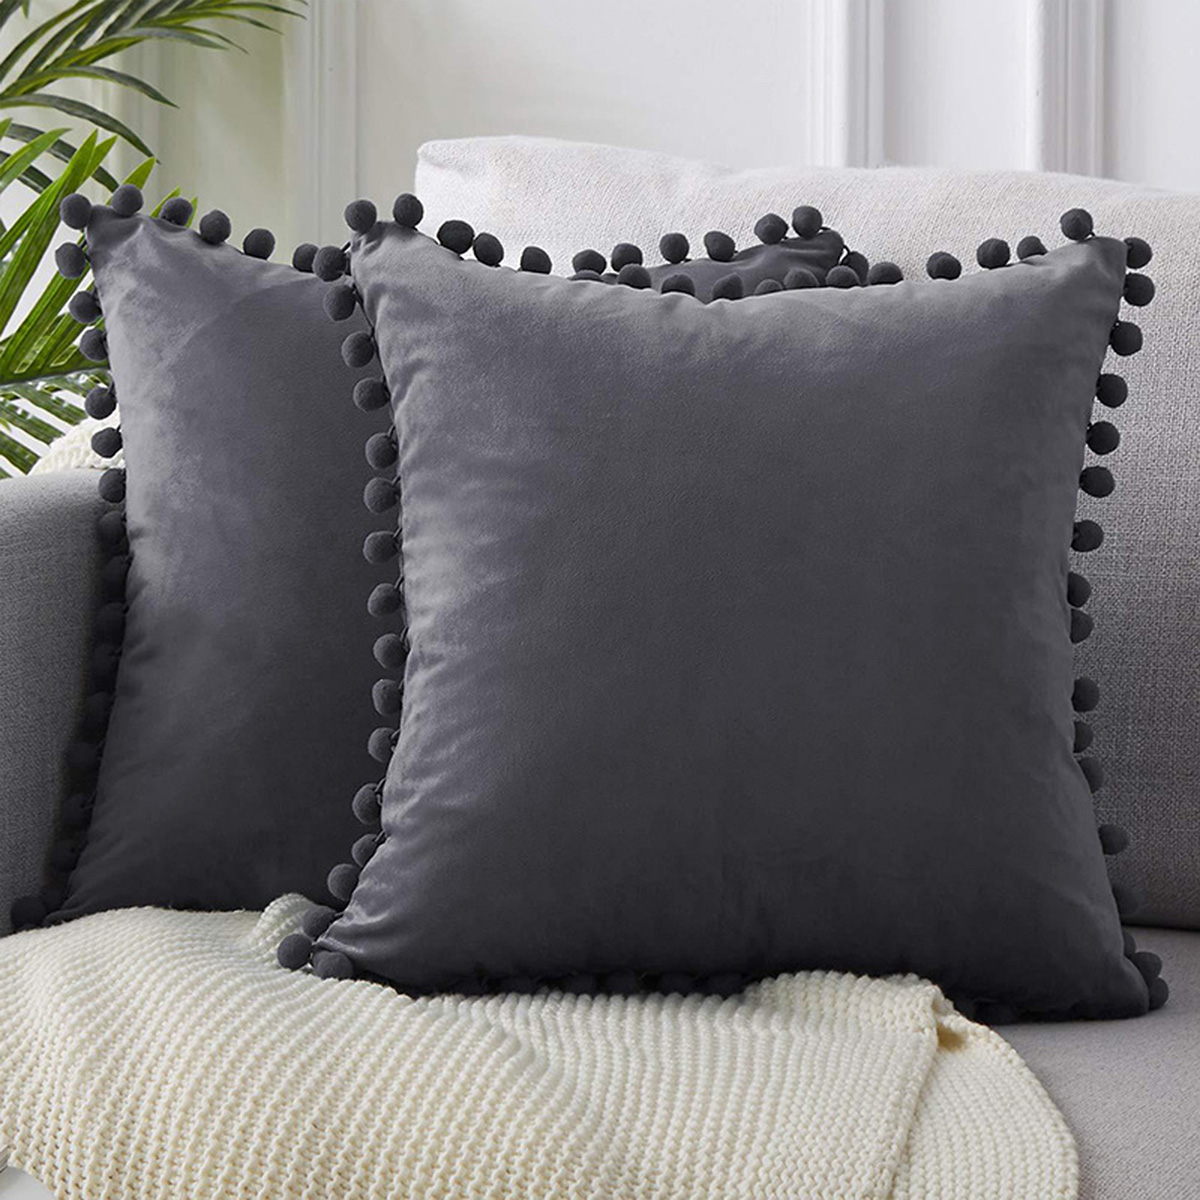 4545cm-Soft-Velvet-Pillow-Covers-Cute-Pom-Poms-Throw-Pillow-Covers-Square-Cushion-Case-for-Sofa-Couc-1779027-9